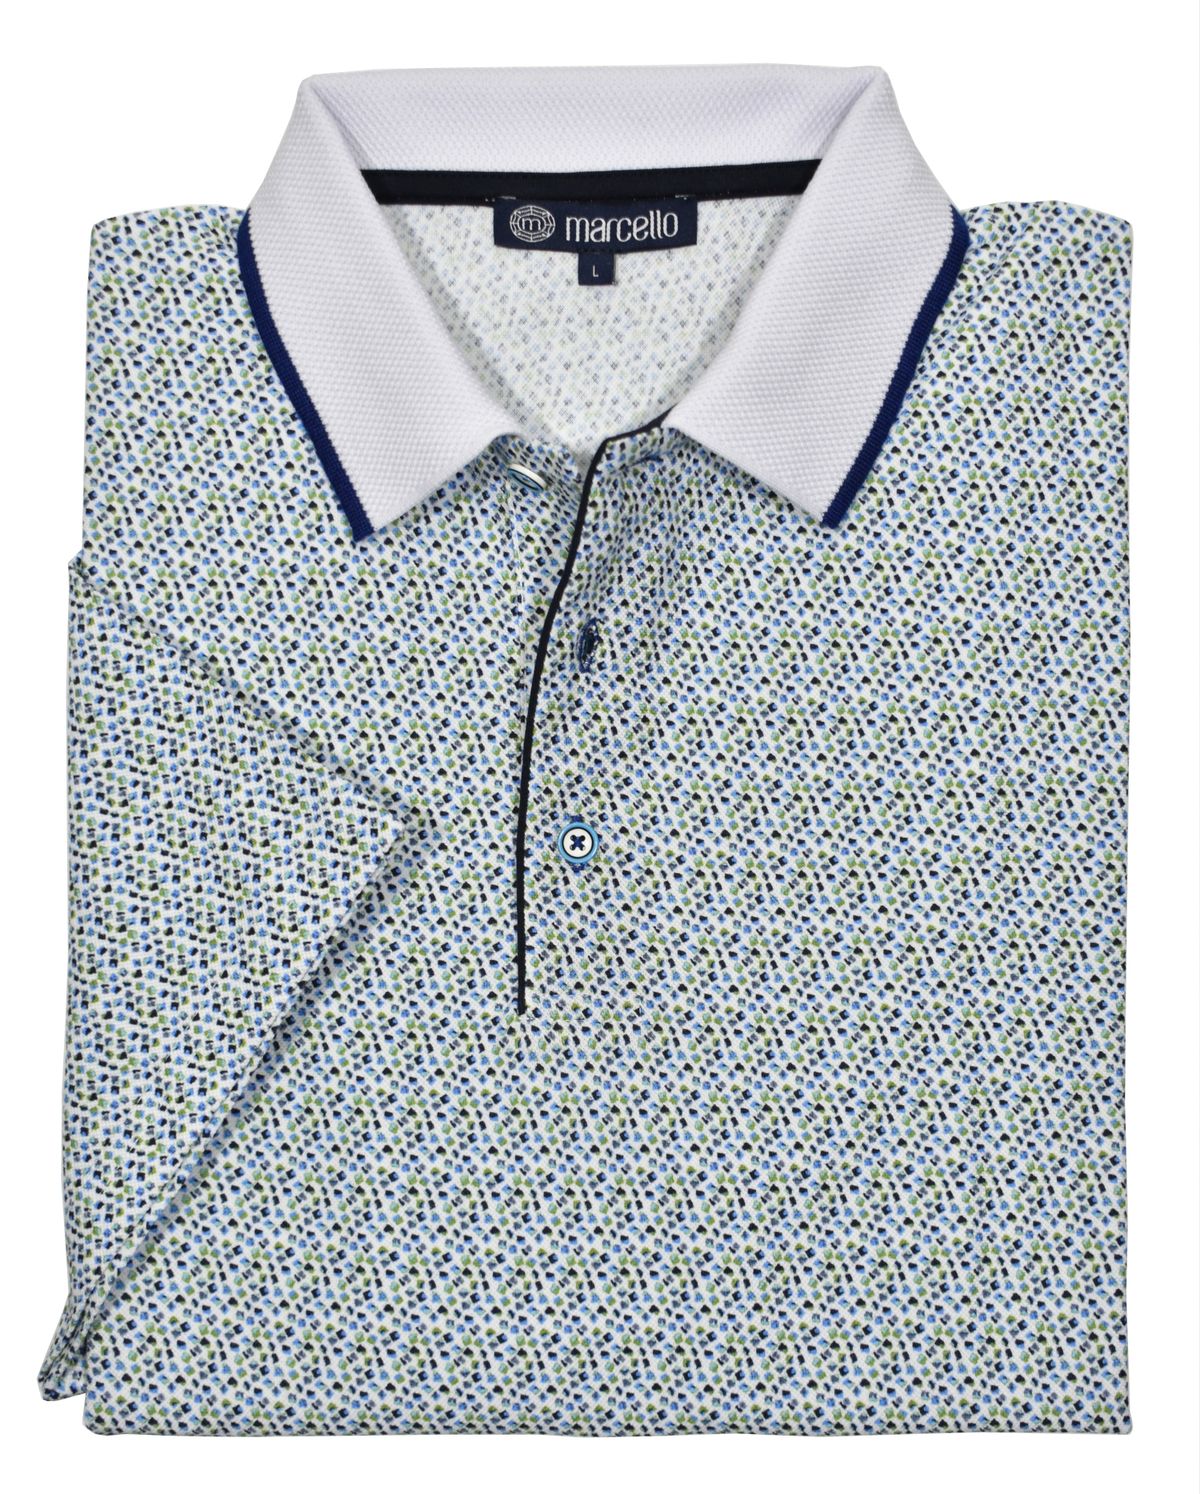 This ultra soft cotton pique polo looks timeless and feels lightweight. Its neat olive and navy abstract pattern, contrast trim fabric, open sleeves and custom buttons make it unique and stylish. Enjoy its classic fit and timeless look.